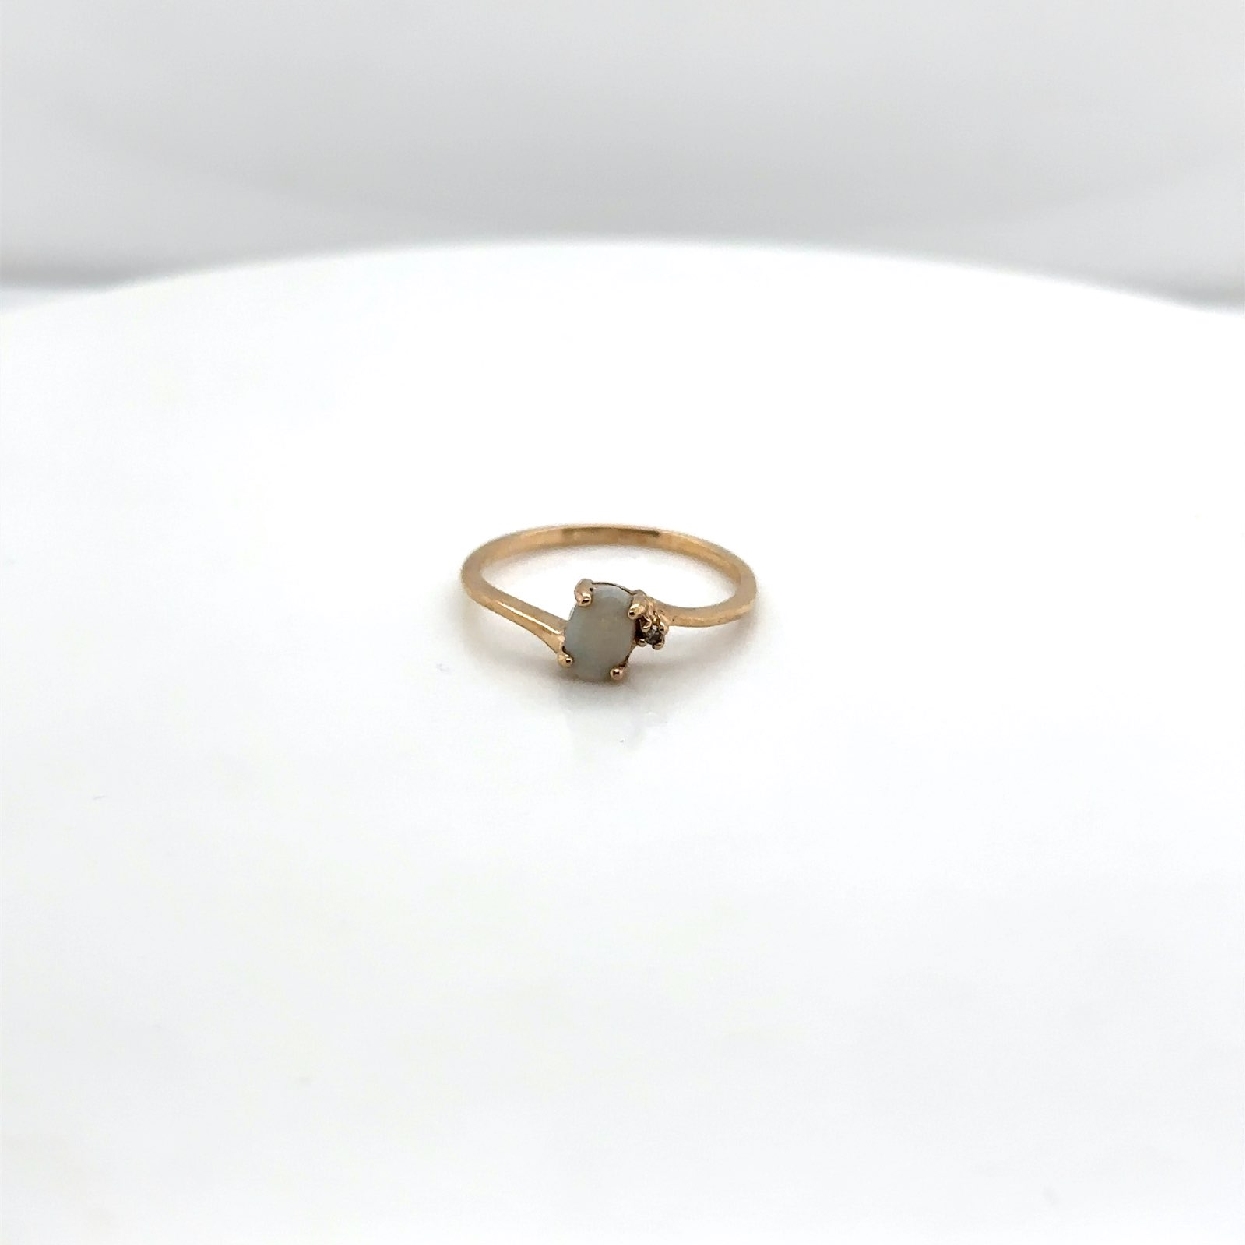 10K Yellow Gold Opal Ring 

Size 6.25